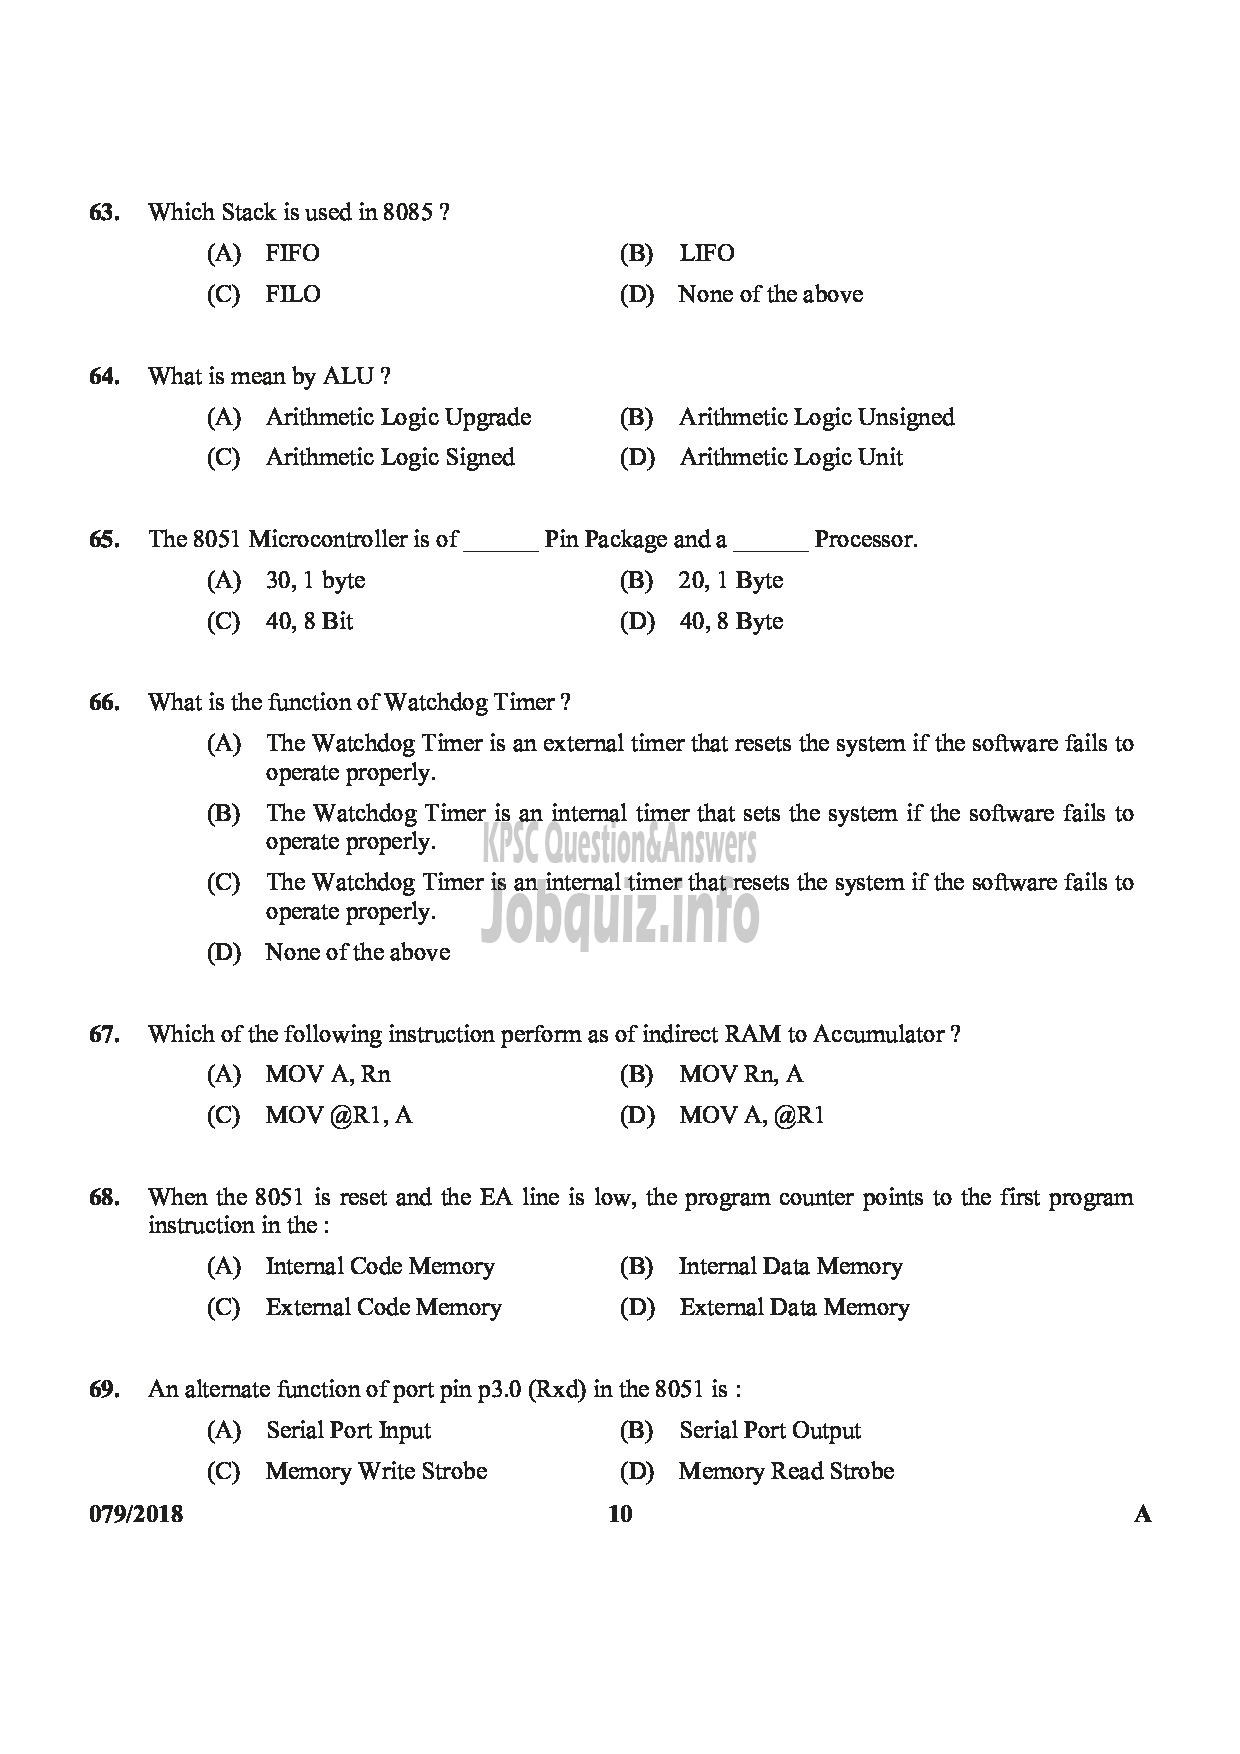 Kerala PSC Question Paper - JUNIOR INSTRUCTOR ELECTRONIC MECHANIC INDUSTRIAL TRAINING-10